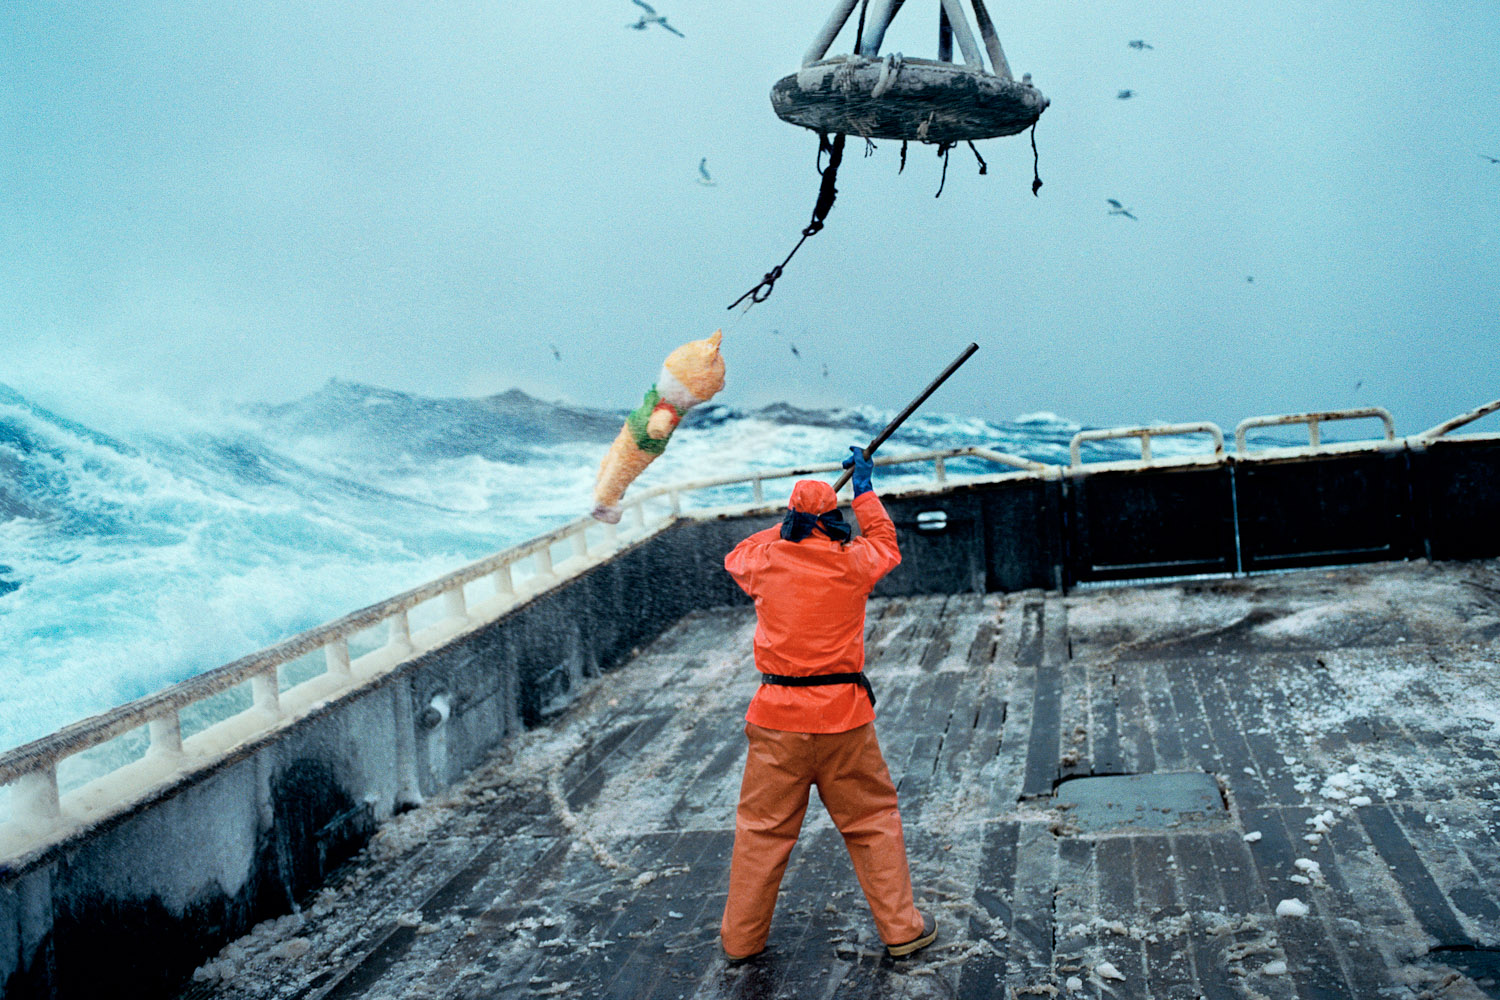 Bering Sea Birthday, 2006
                              Every year, fellow deckhand Matthew's birthday falls a few days into the Opilio crab season, on a grueling 20-hour workday. In 2006, Arnold surprised him with a piñata, as an icy storm raged around them.